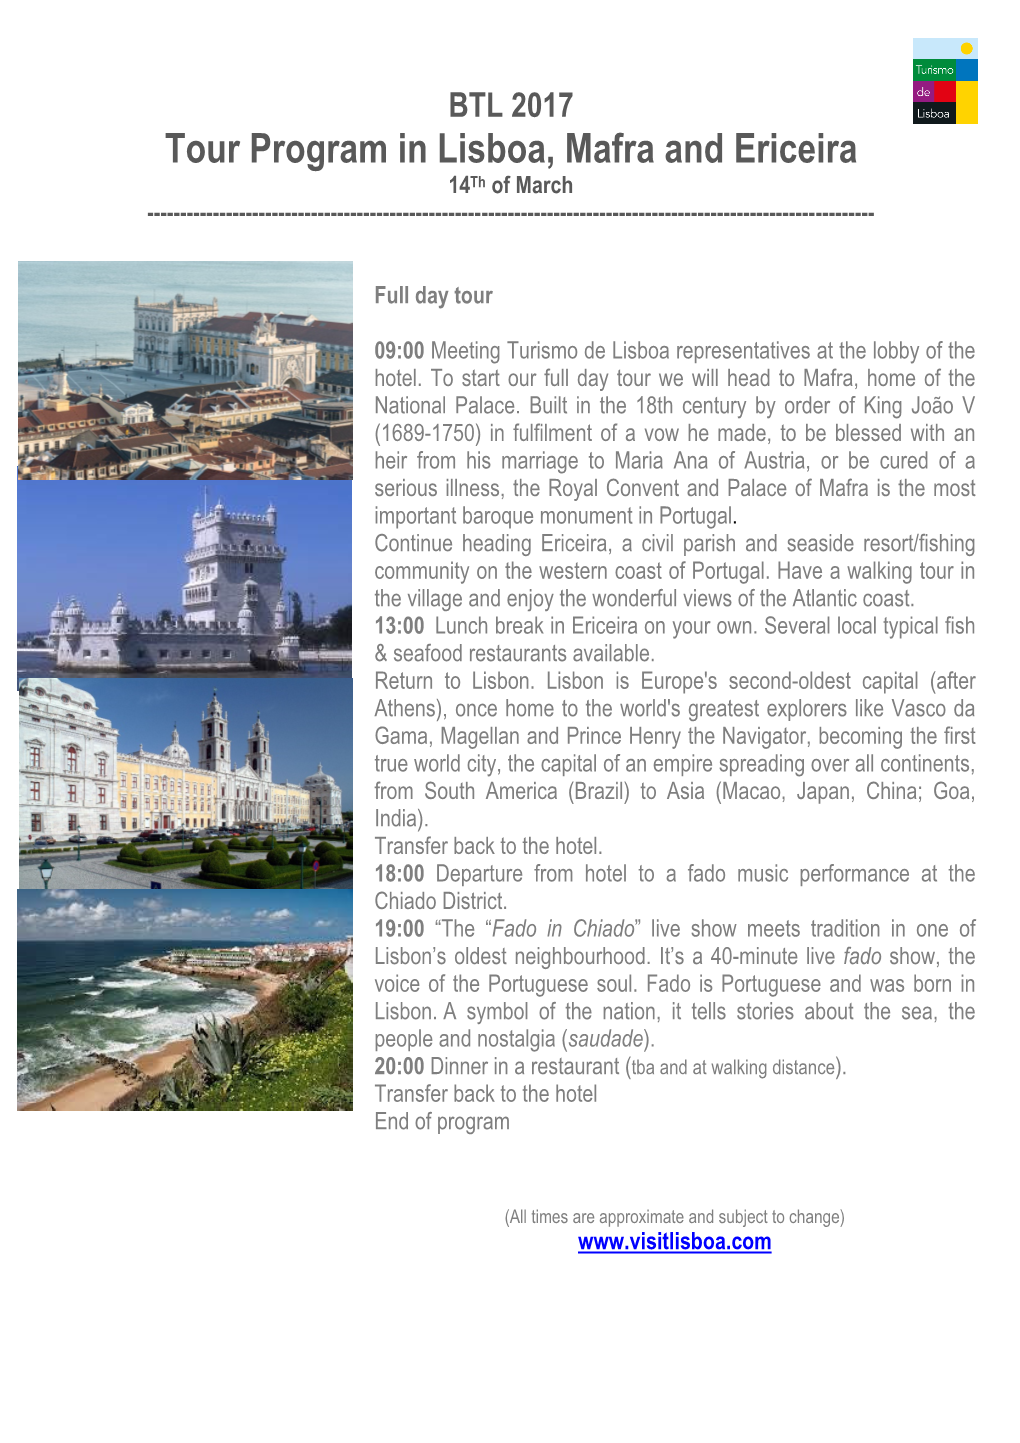 Tour Program in Lisboa, Mafra and Ericeira 14 Th of March